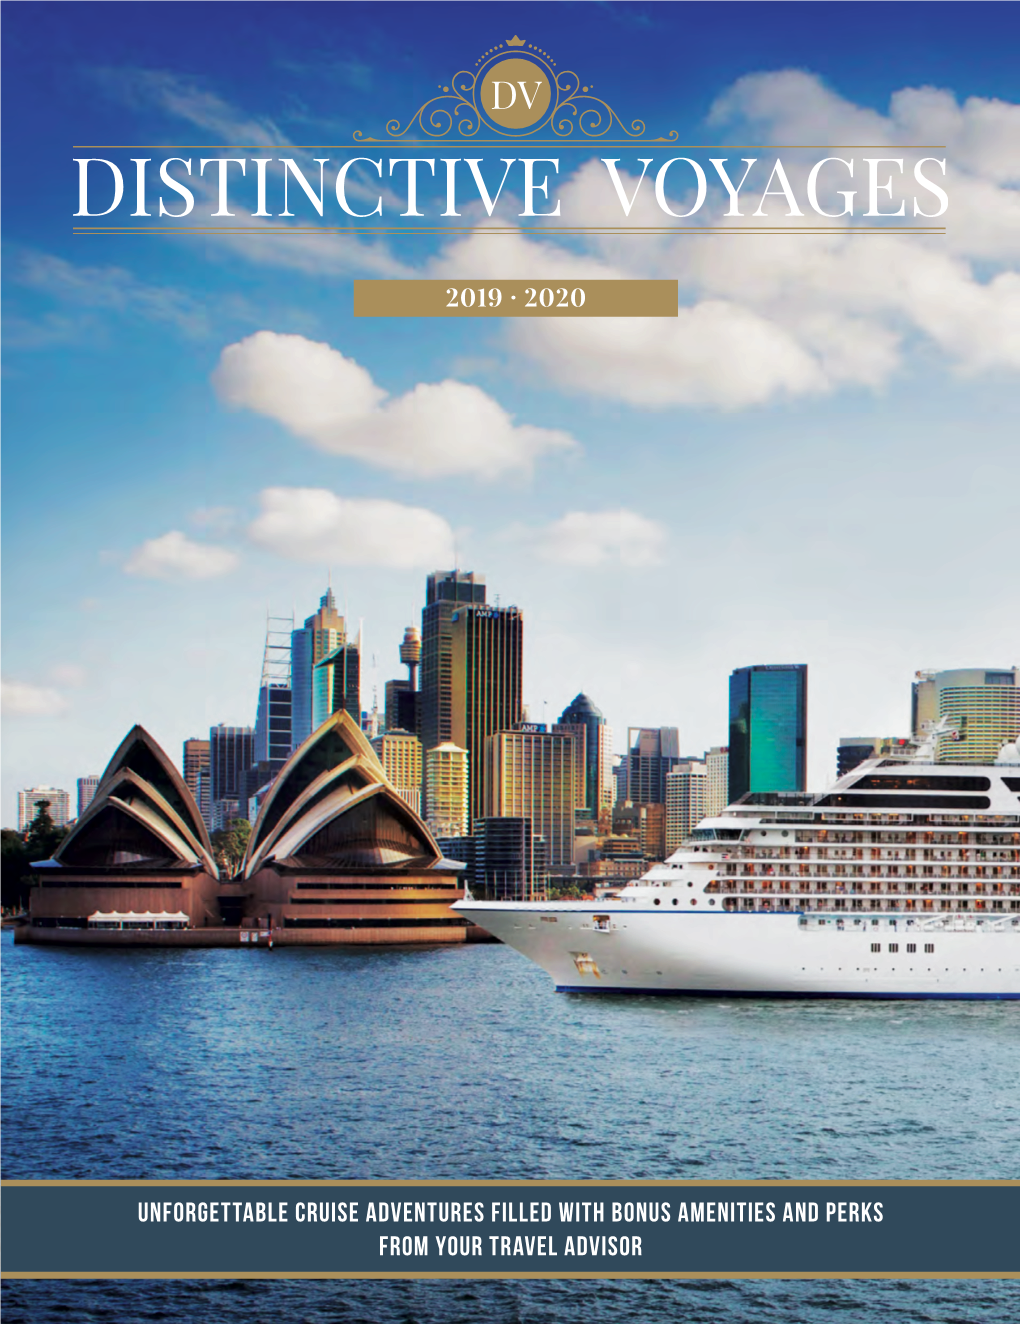 Unforgettable Cruise Adventures Filled with Bonus Amenities and Perks from YOUR TRAVEL ADVISOR DV DISTINCTIVE VOYAGES